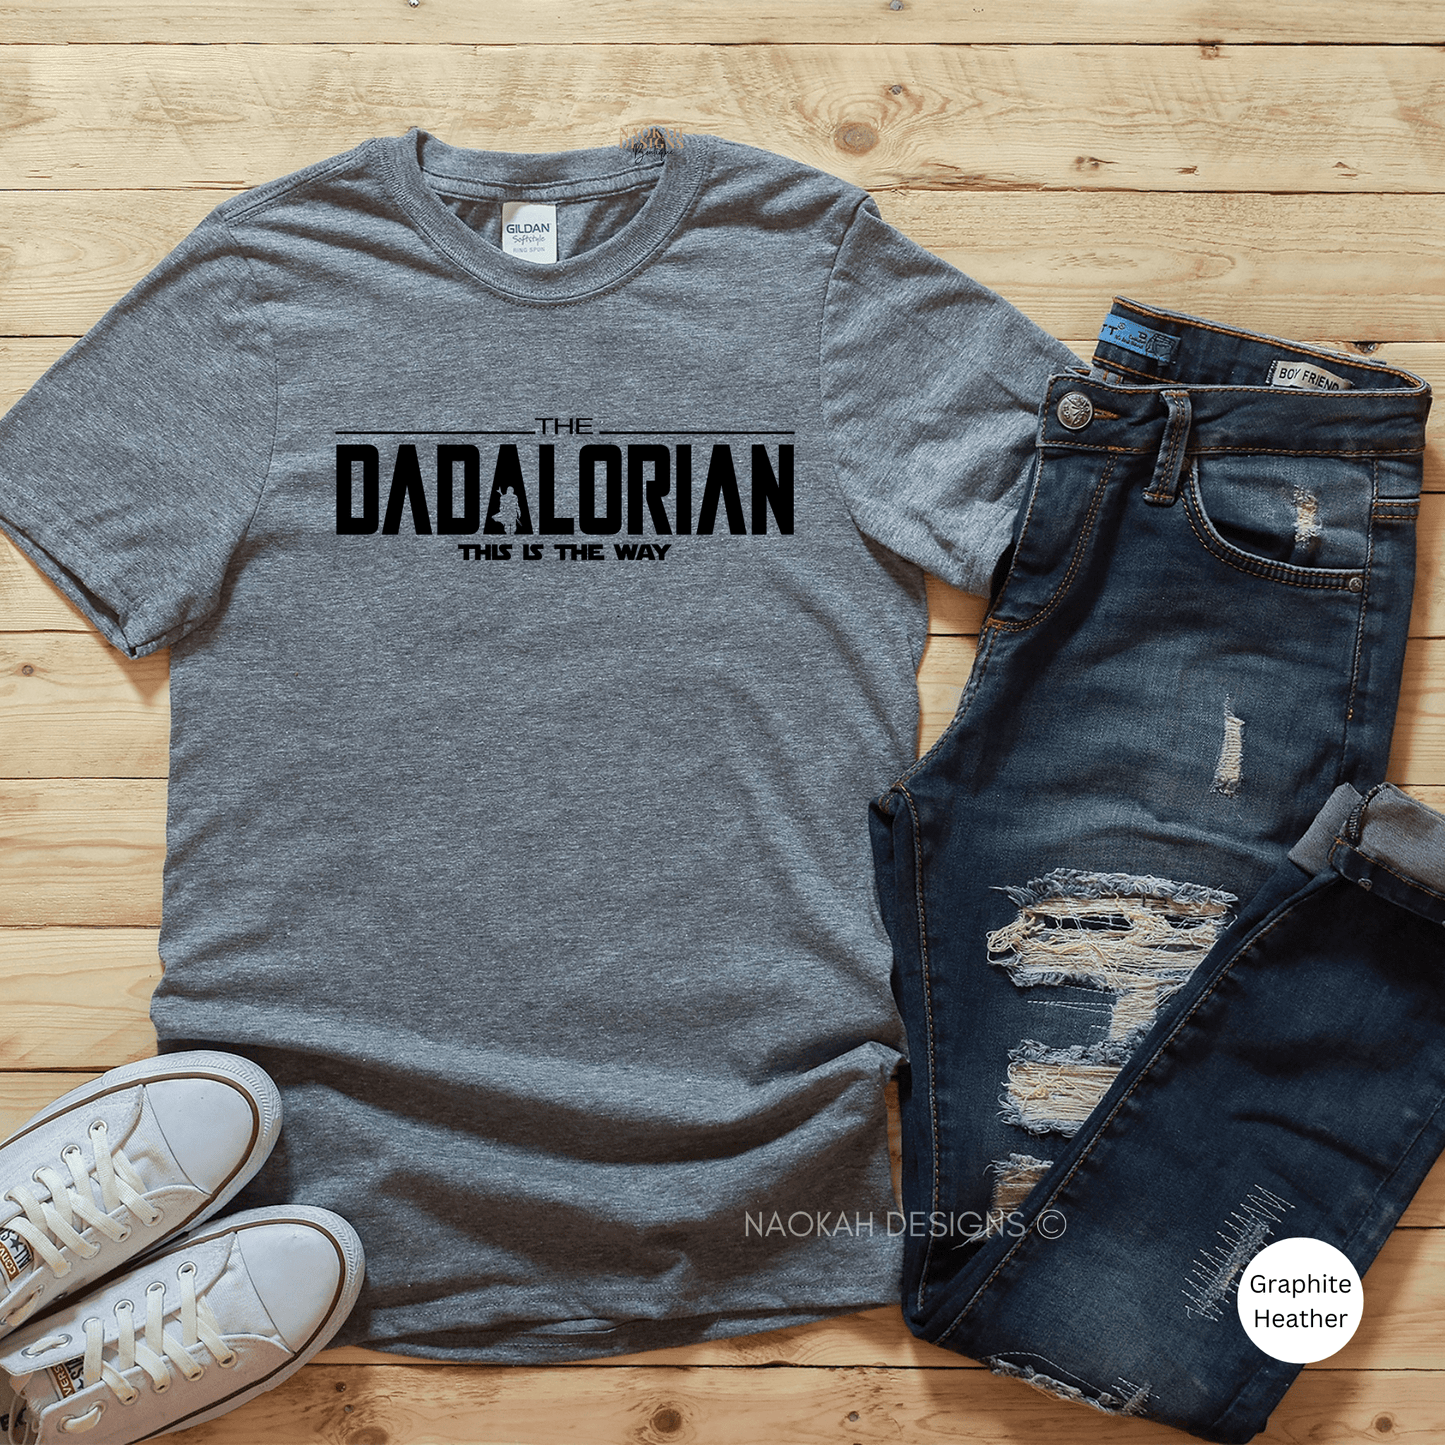 the dadalorian - this is the way shirt